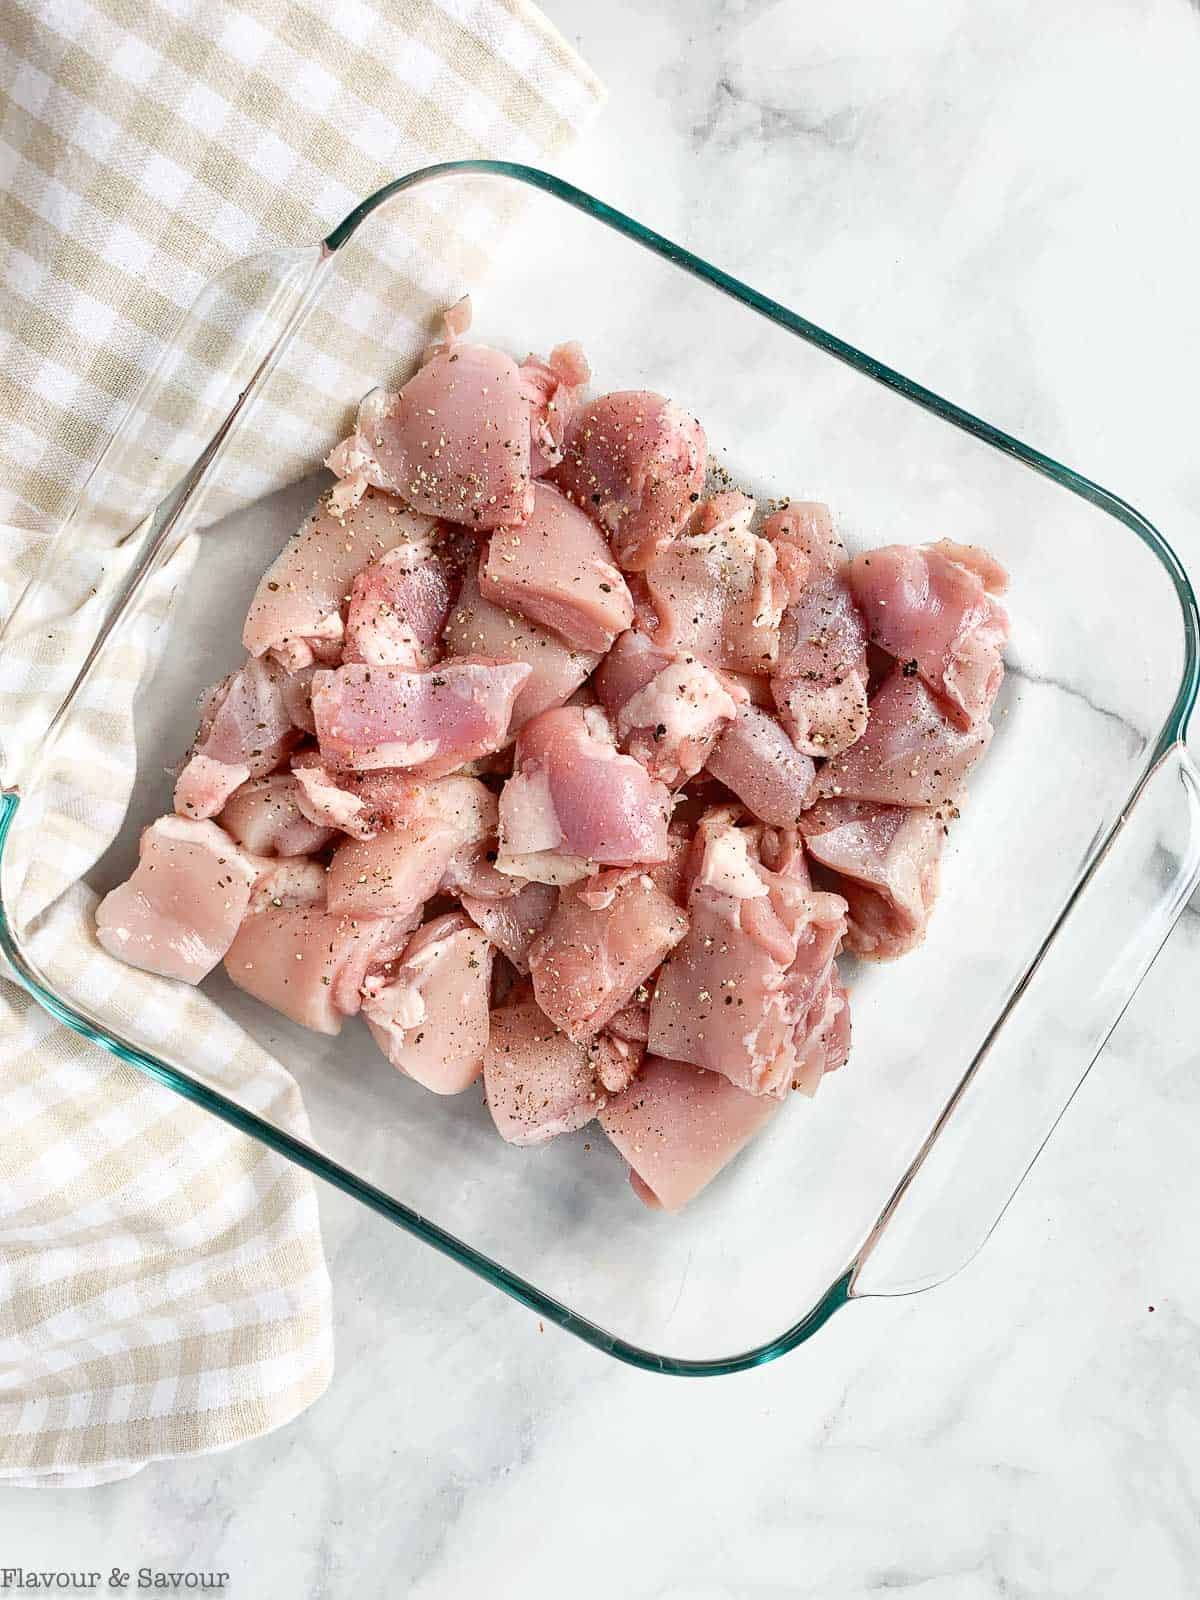 Raw chicken in a glass dish.